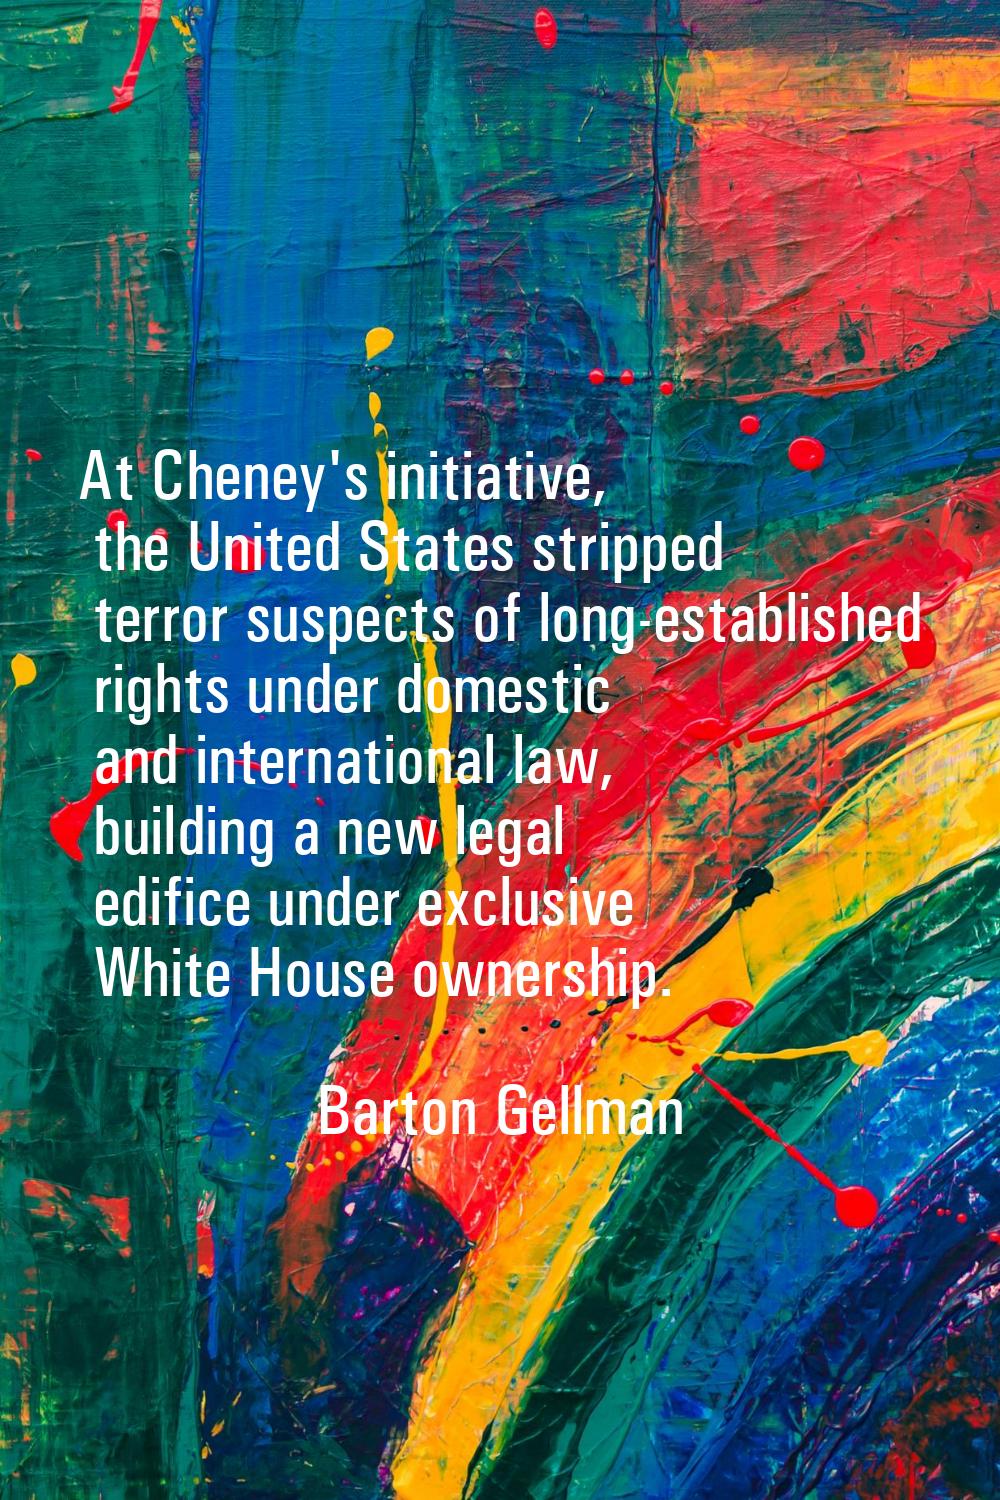 At Cheney's initiative, the United States stripped terror suspects of long-established rights under